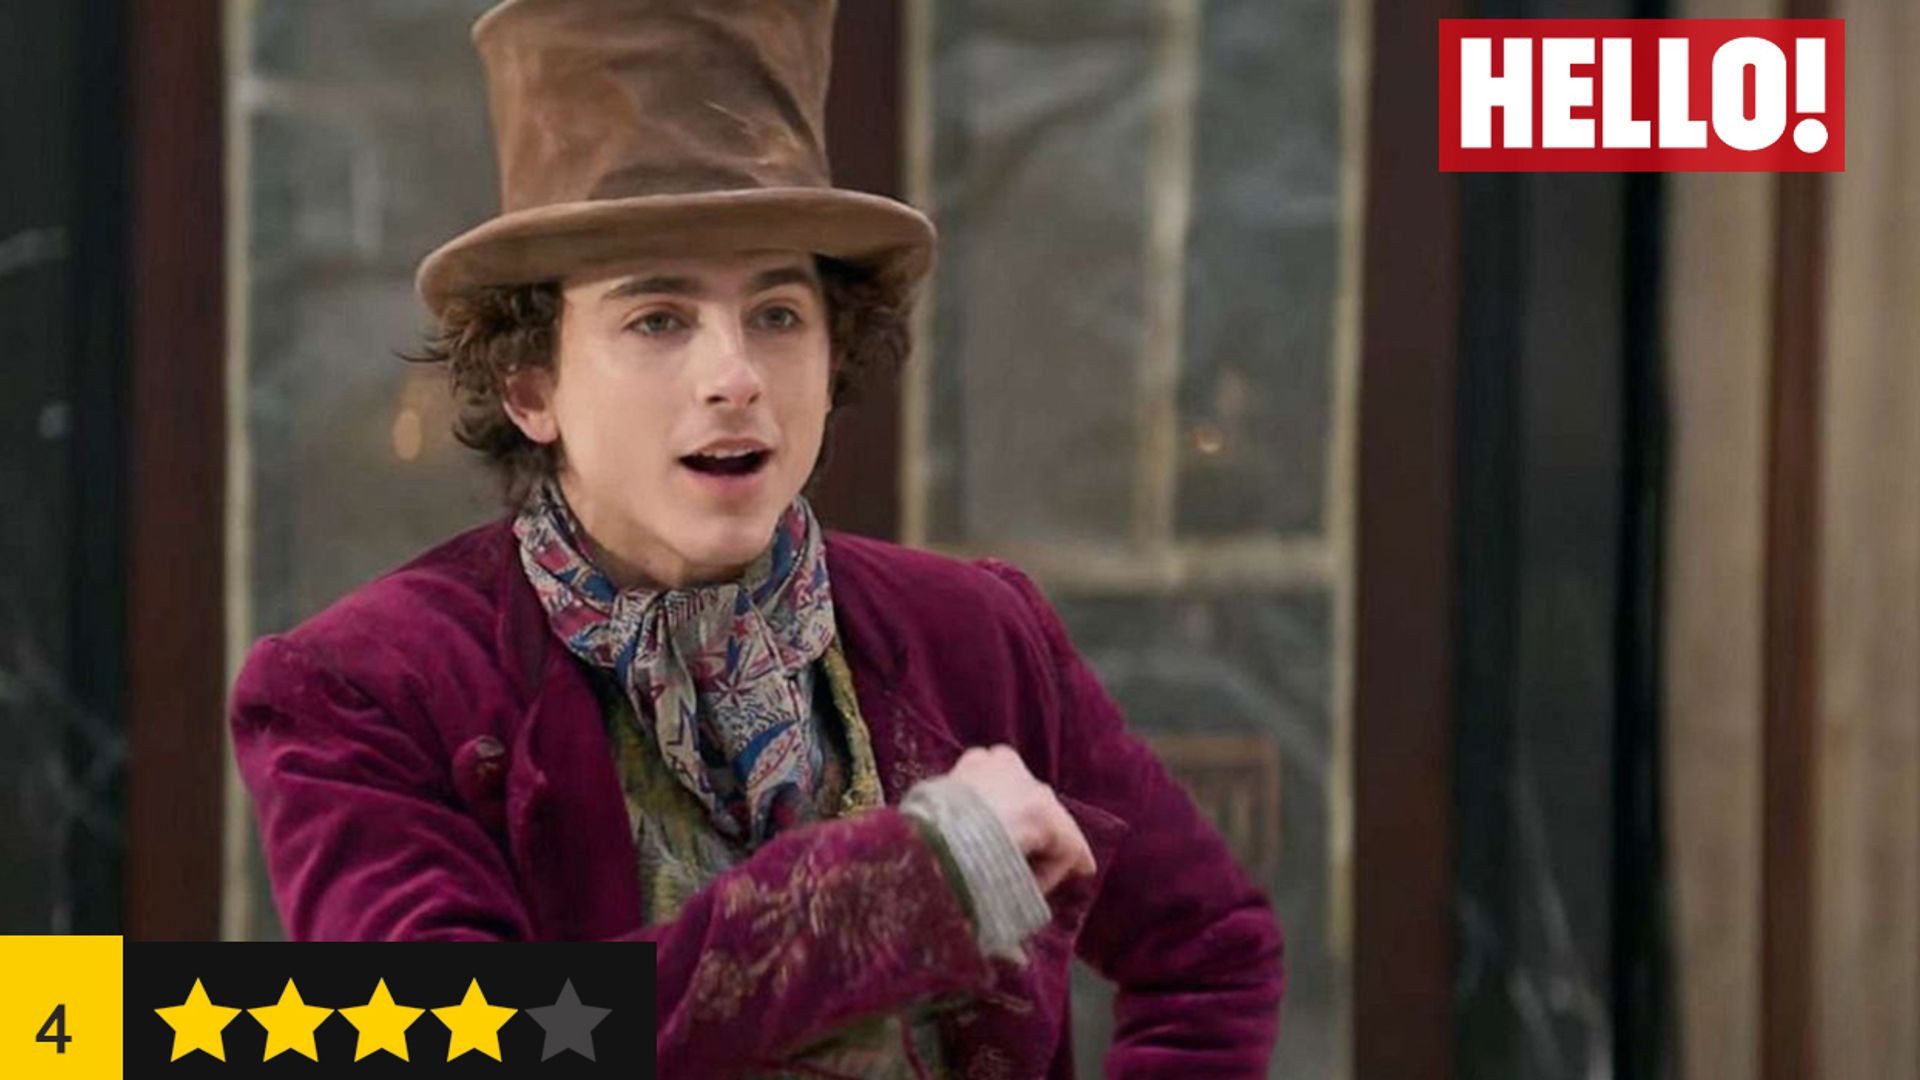 Timothee Chalamet poses in character as Willy Wonka, there are four stars in the bottom left 